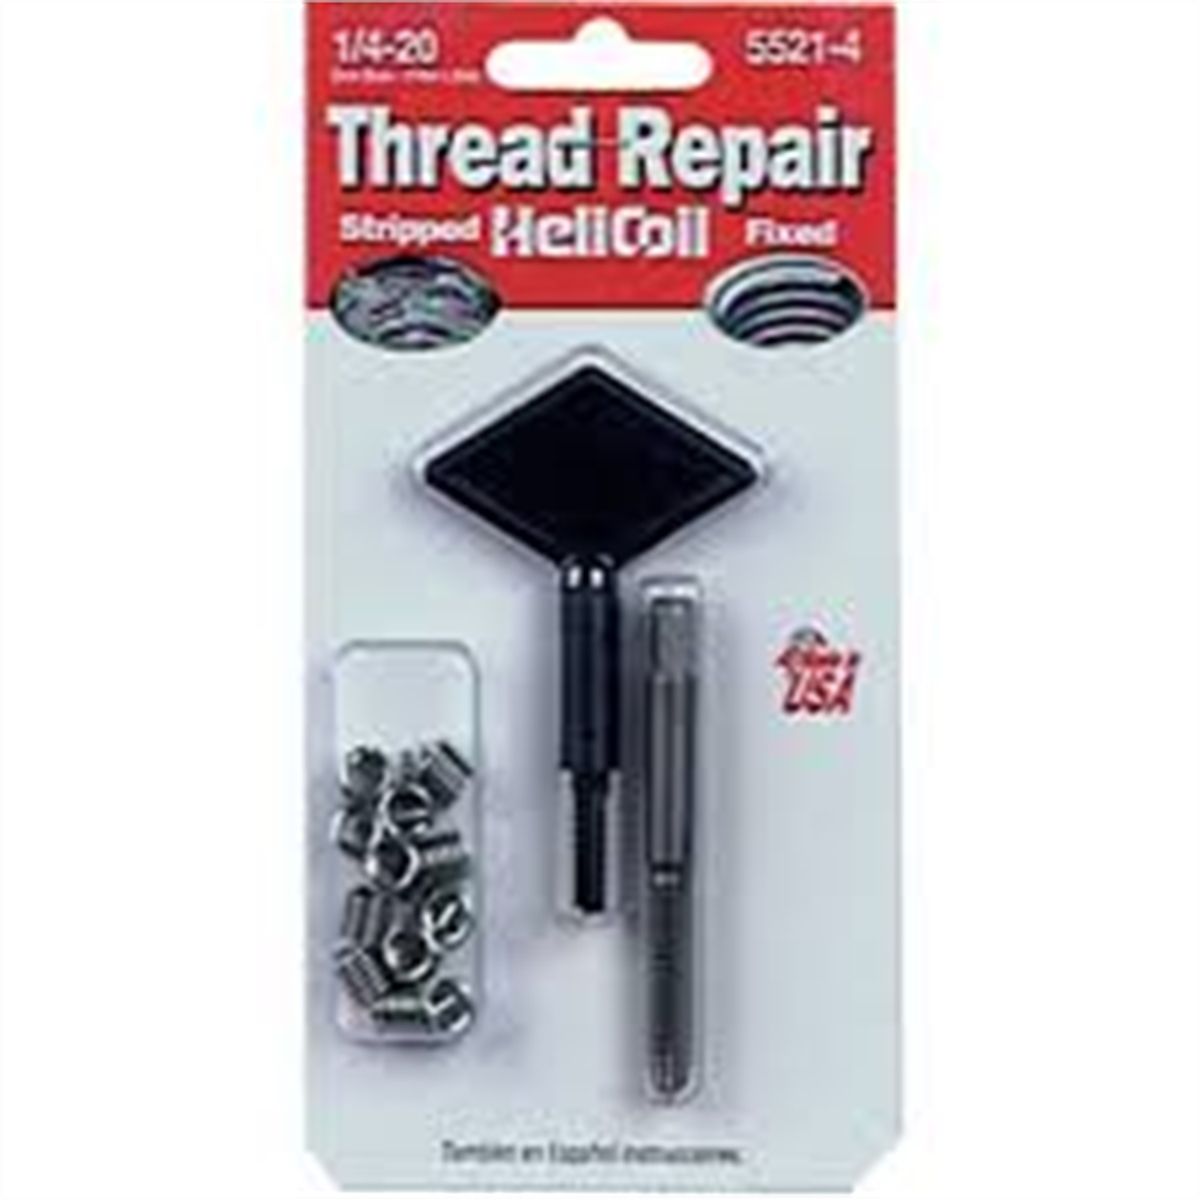 Perma-Coil 208-104 Thread Insert Pack 1/4-20 12PC Helicoil 5521-4 